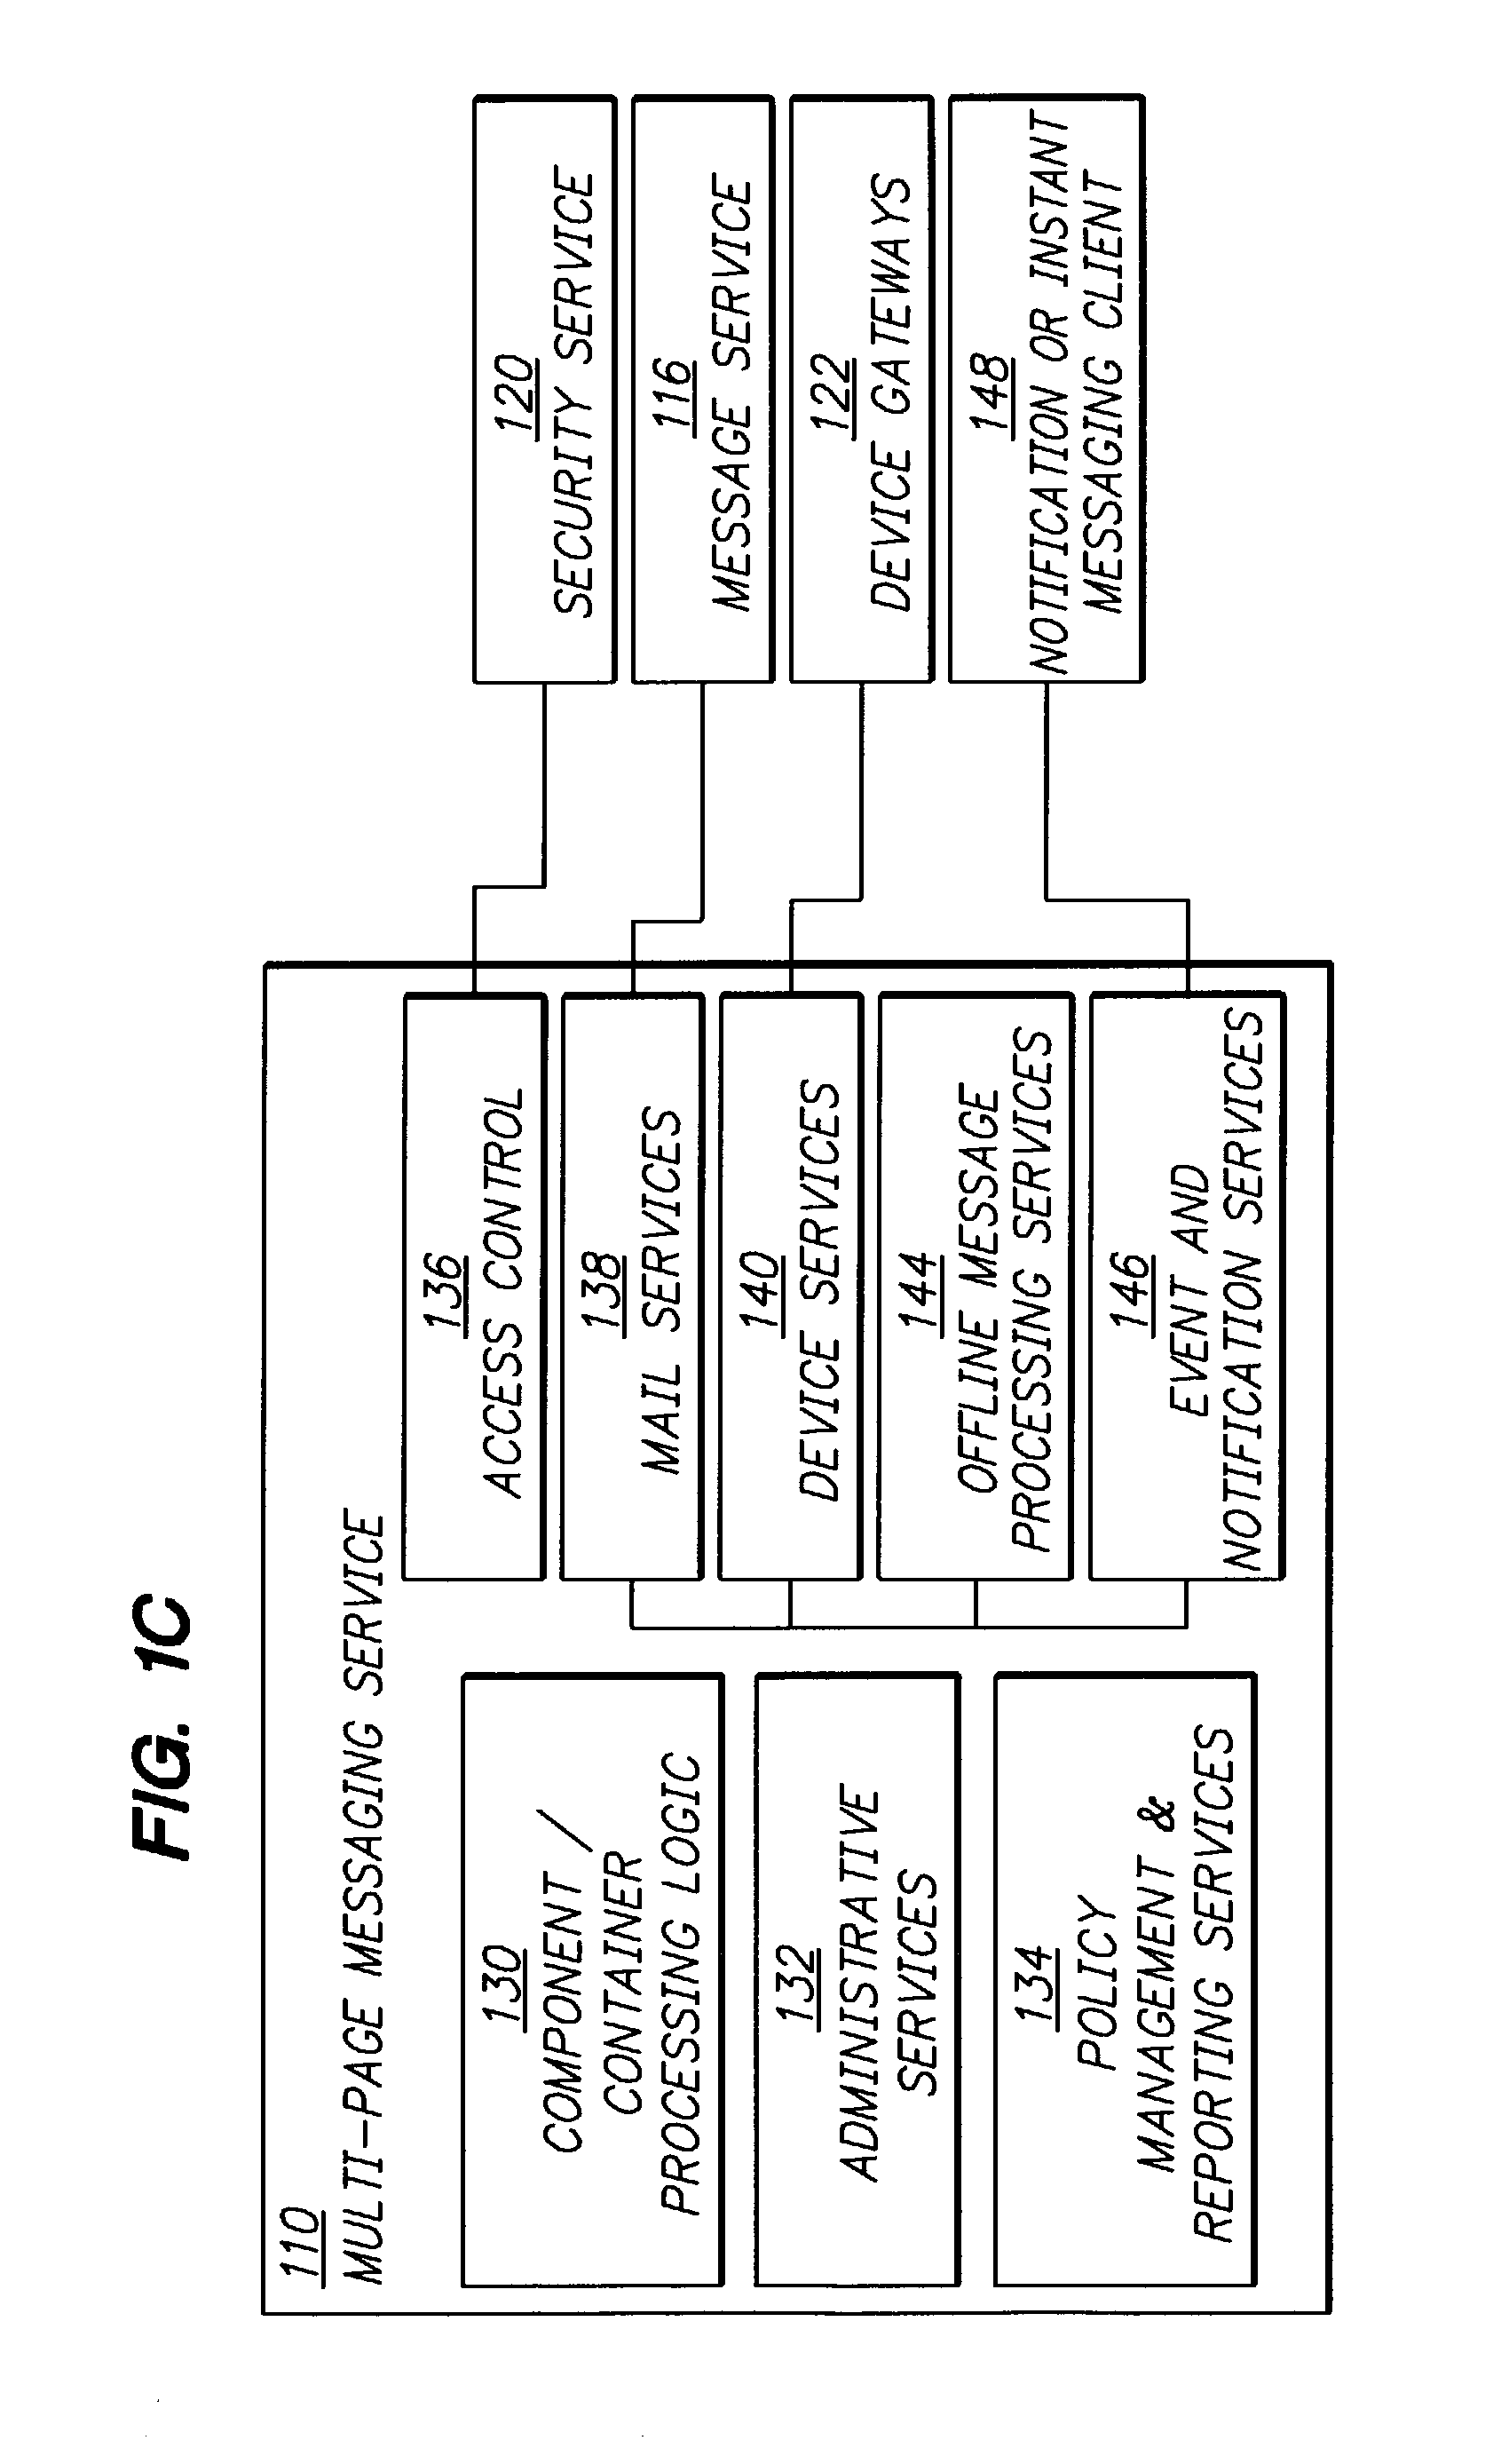 Methods and apparatus providing electronic messages that are linked and aggregated